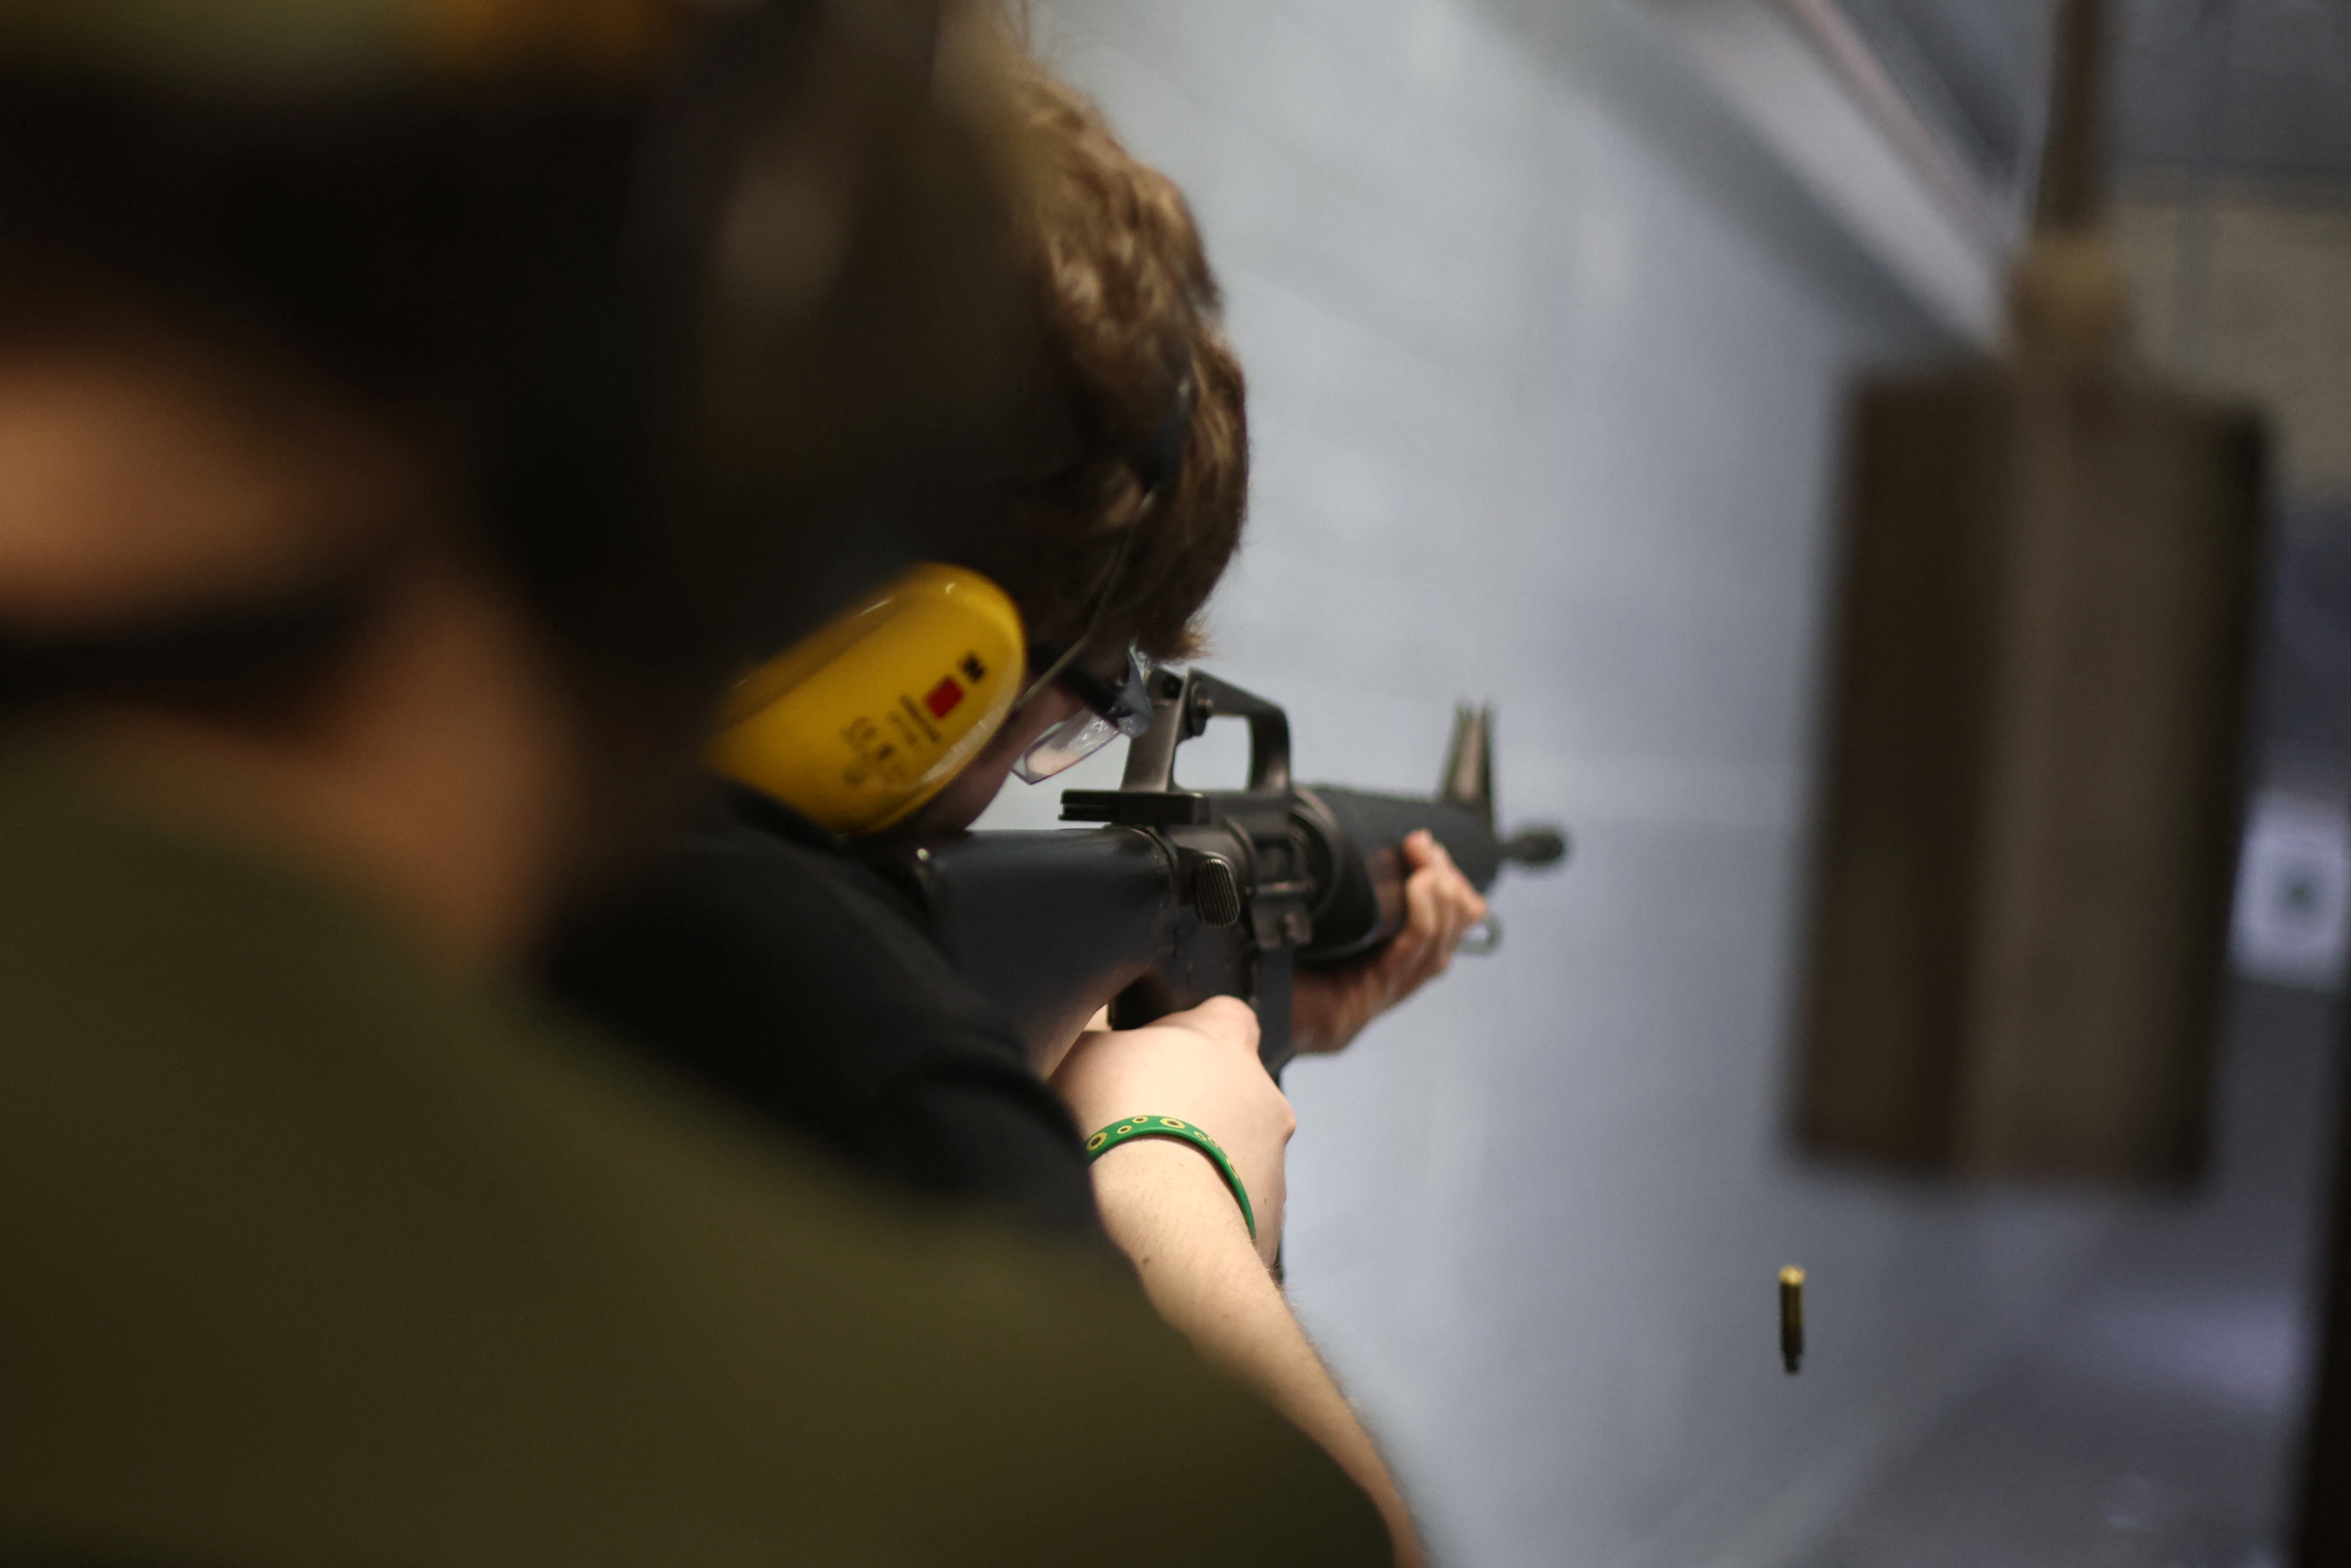 Polish shooting ranges see rise in new users due to Ukraine war | Reuters